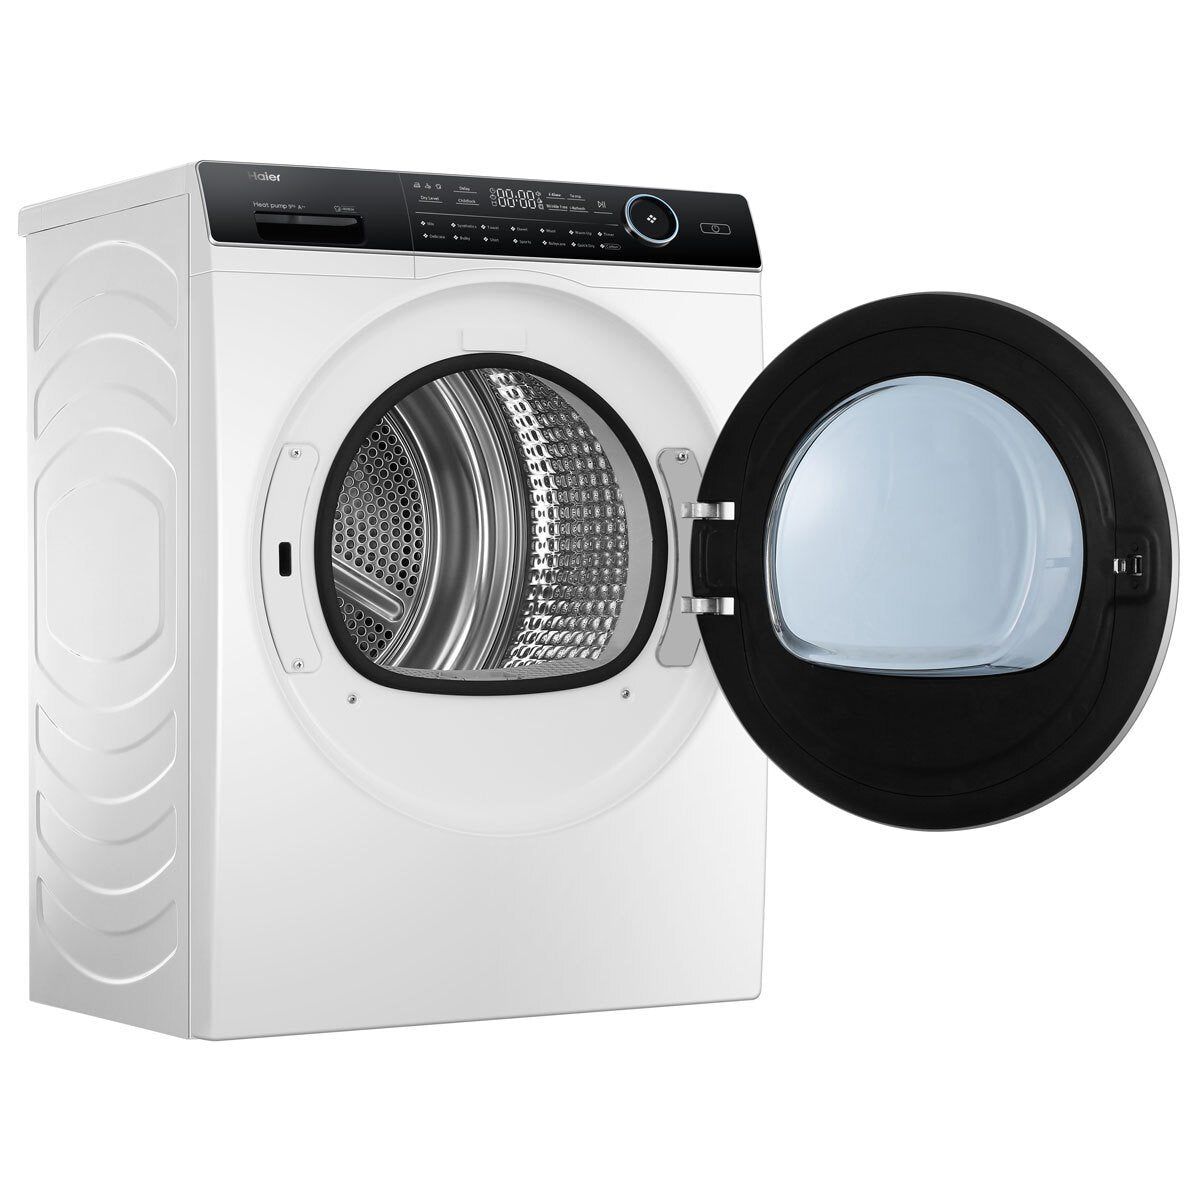 Haier HD90-A2979, 9kg Heat Pump Tumble Dryer, A++ Rated in White